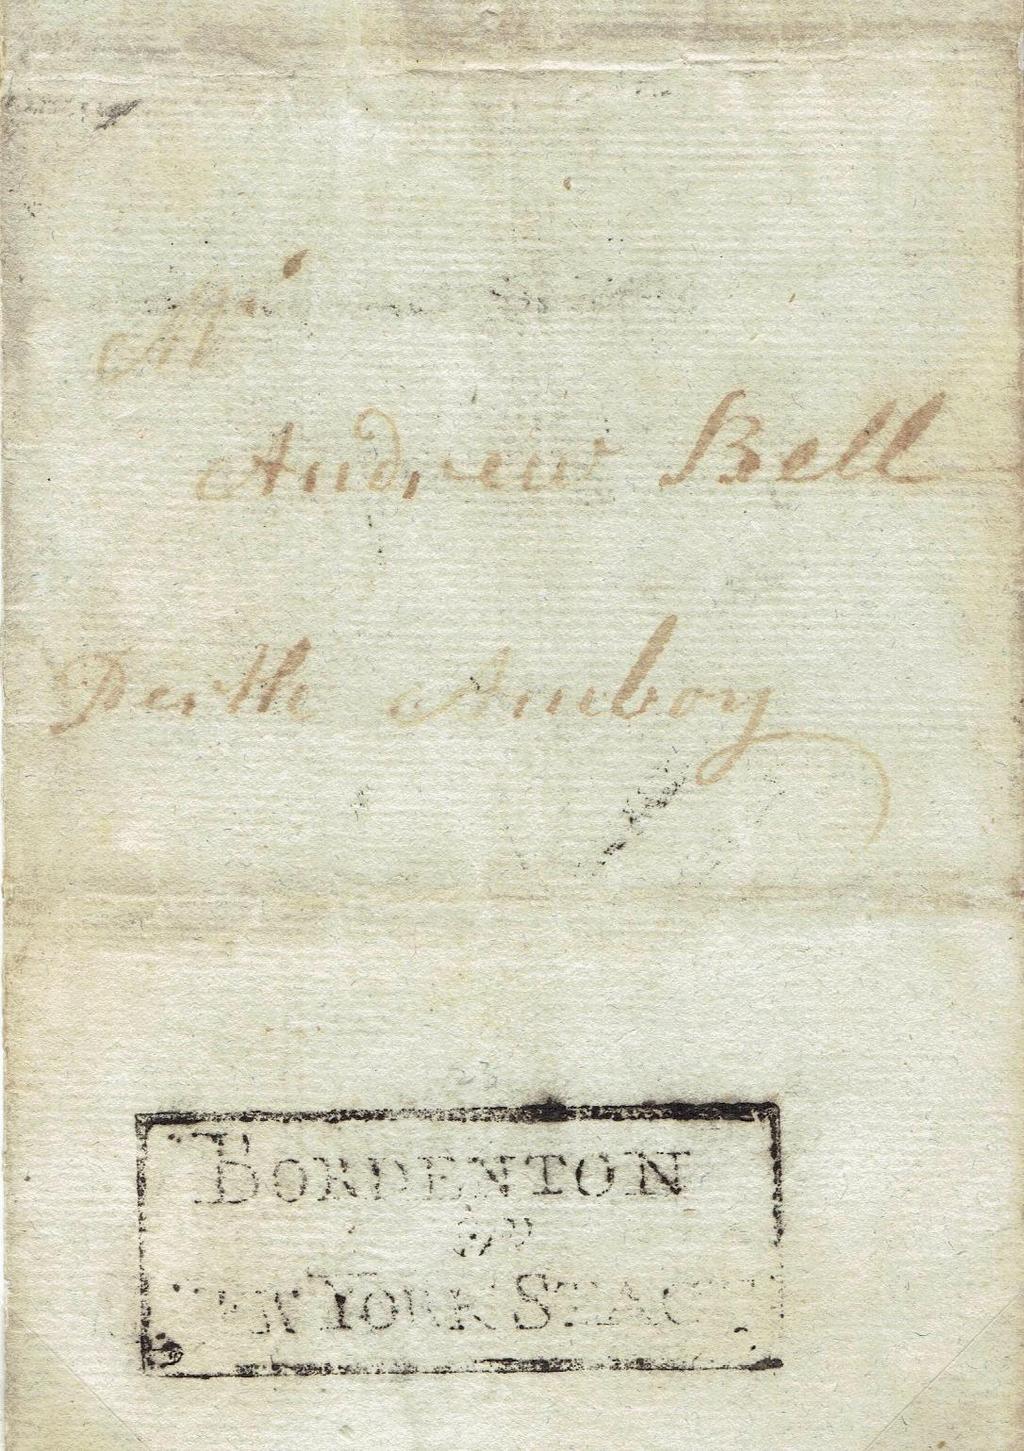 Bordenton & New York Stage 1786 This is the earliest reported use of an independent mail handstamp.